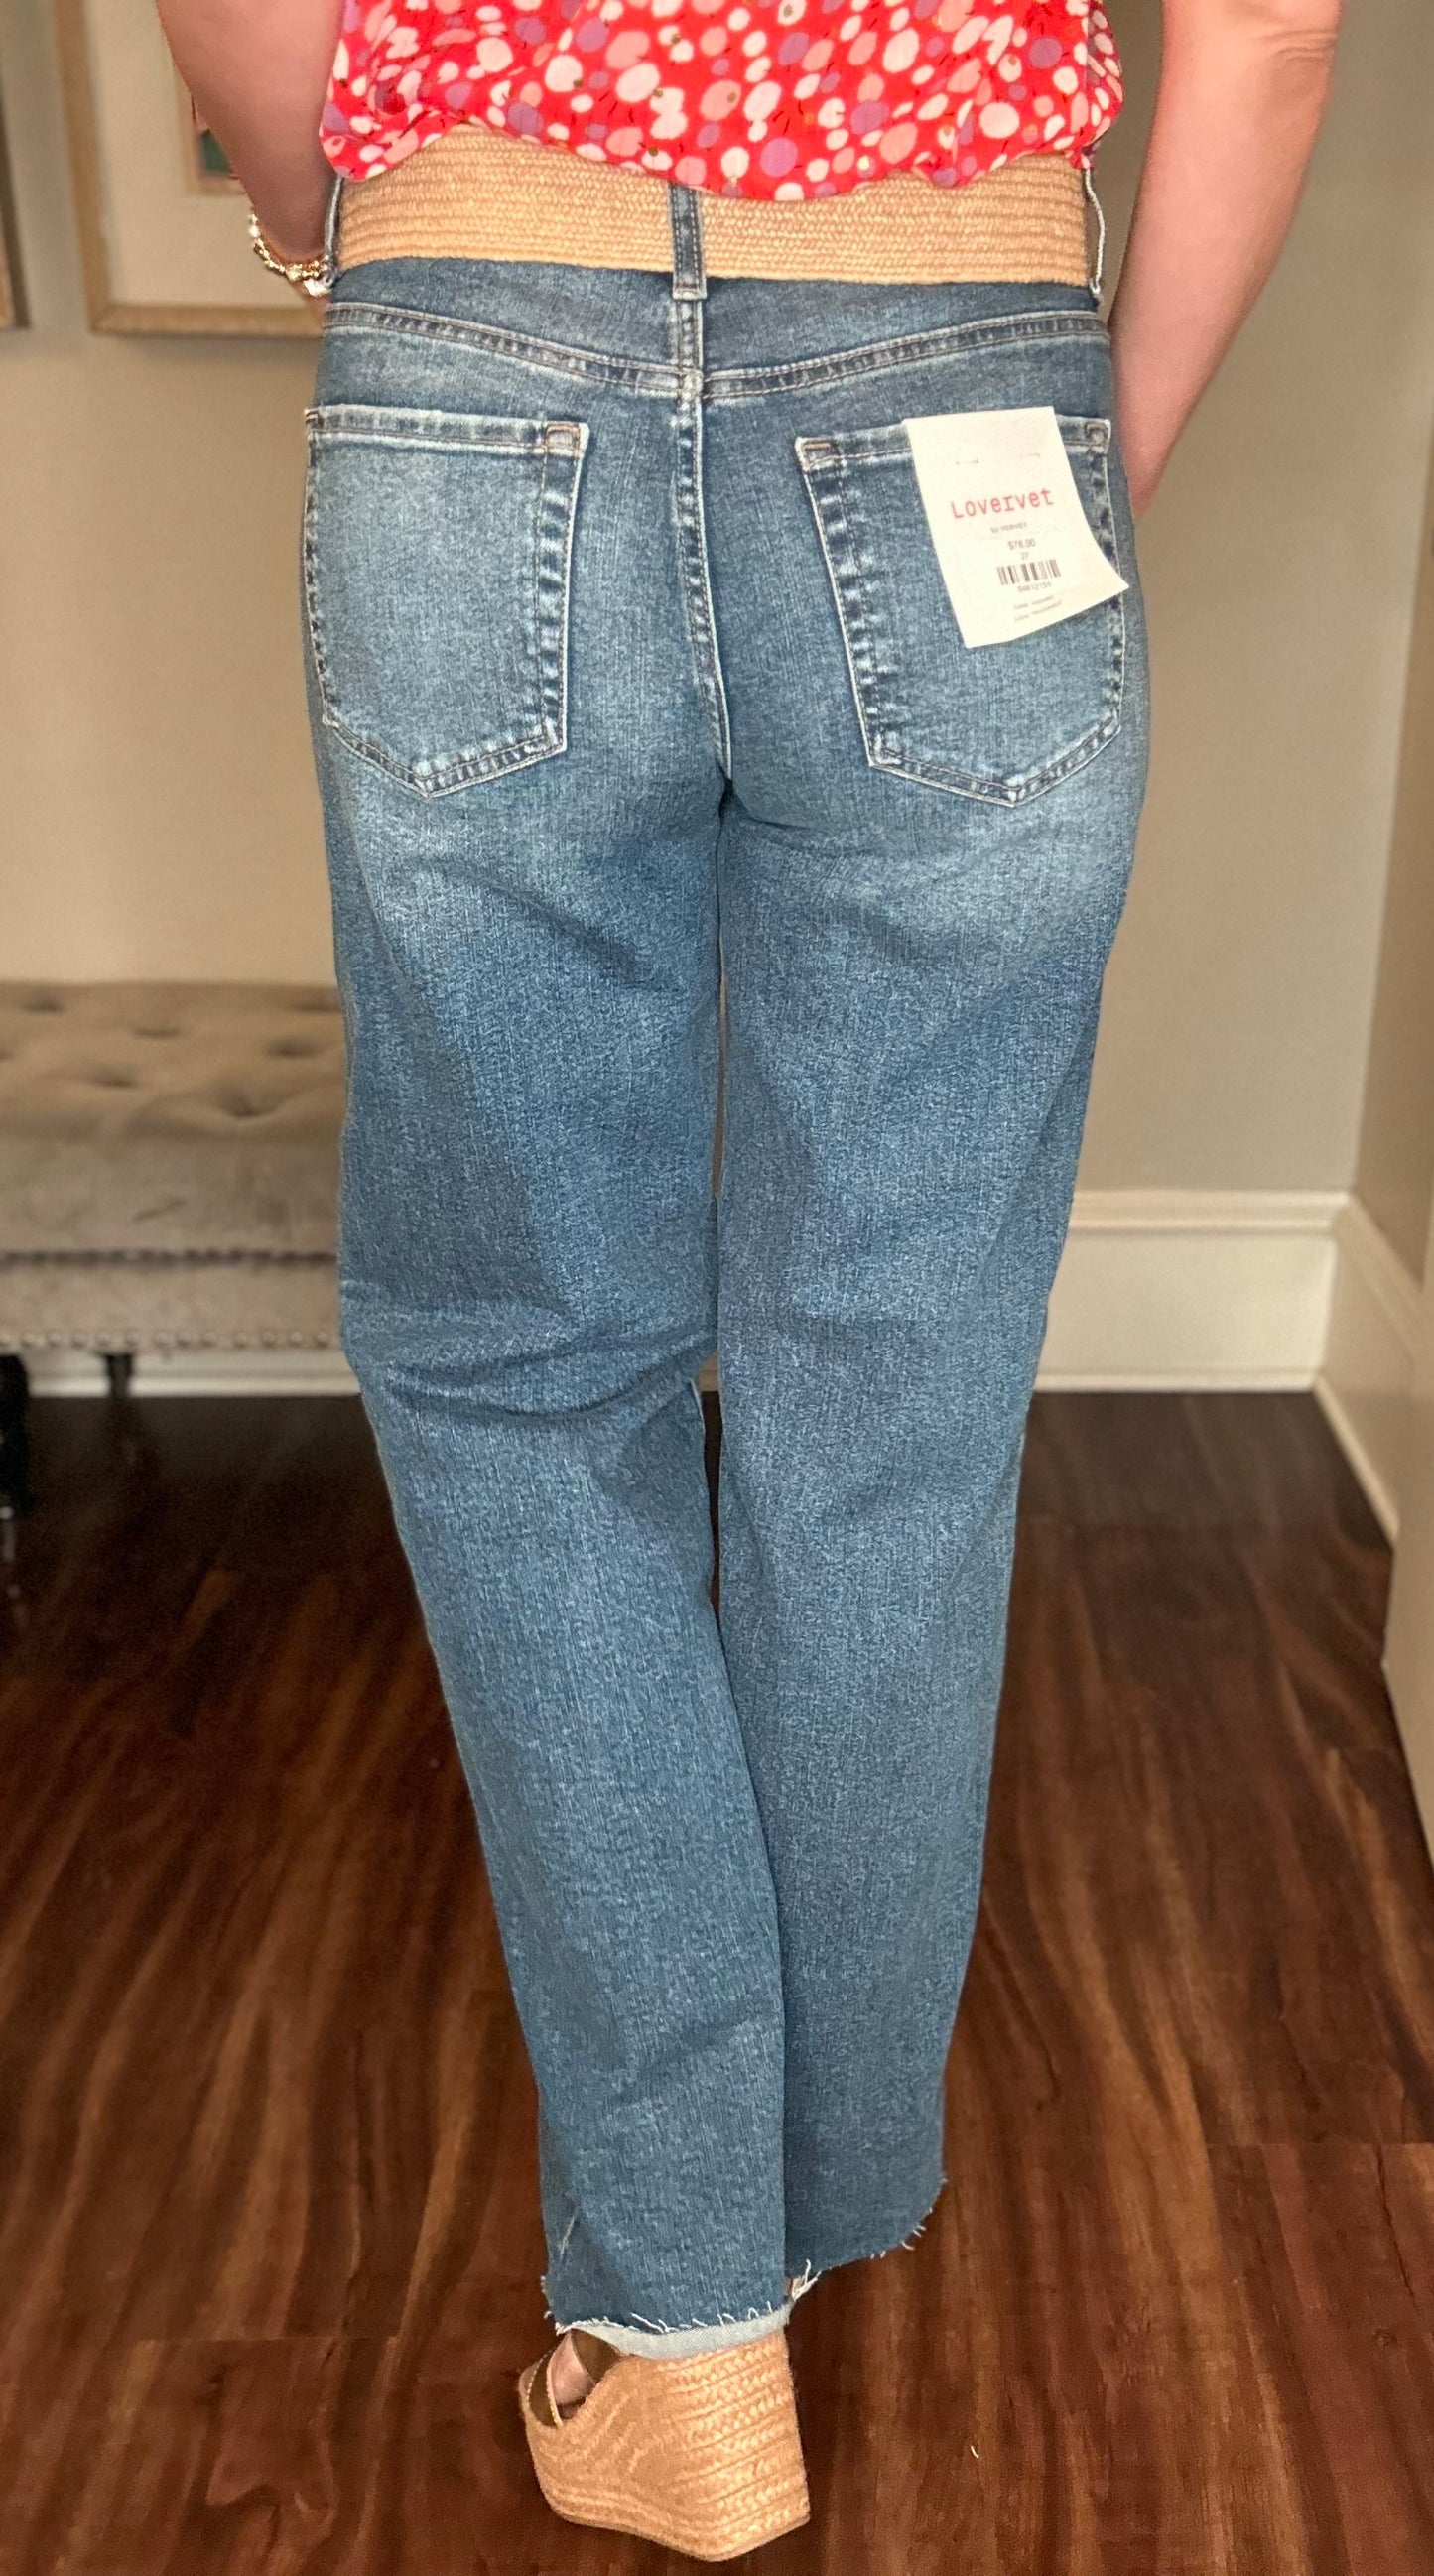 VERVET INGENUOUSLY HIGH RISE LOOSE FIT JEAN 3.1